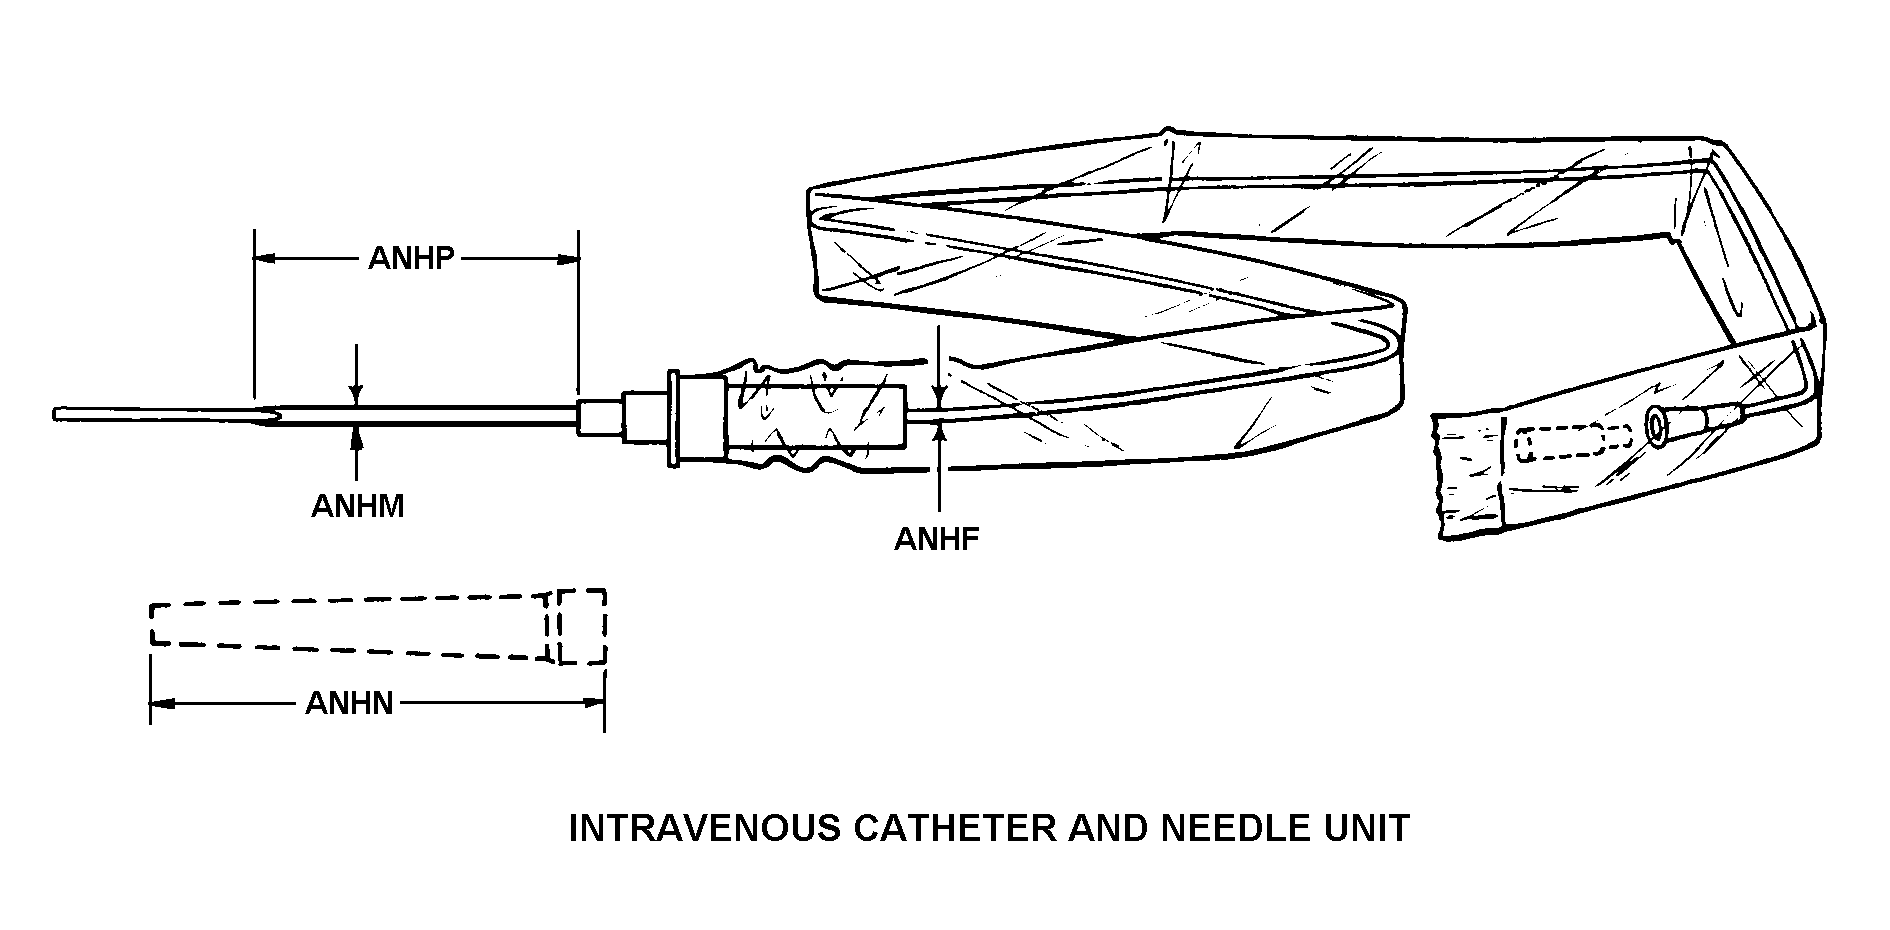 INTRAVENOUS CATHETER AND NEEDLE UNIT style nsn 6515-01-516-4030